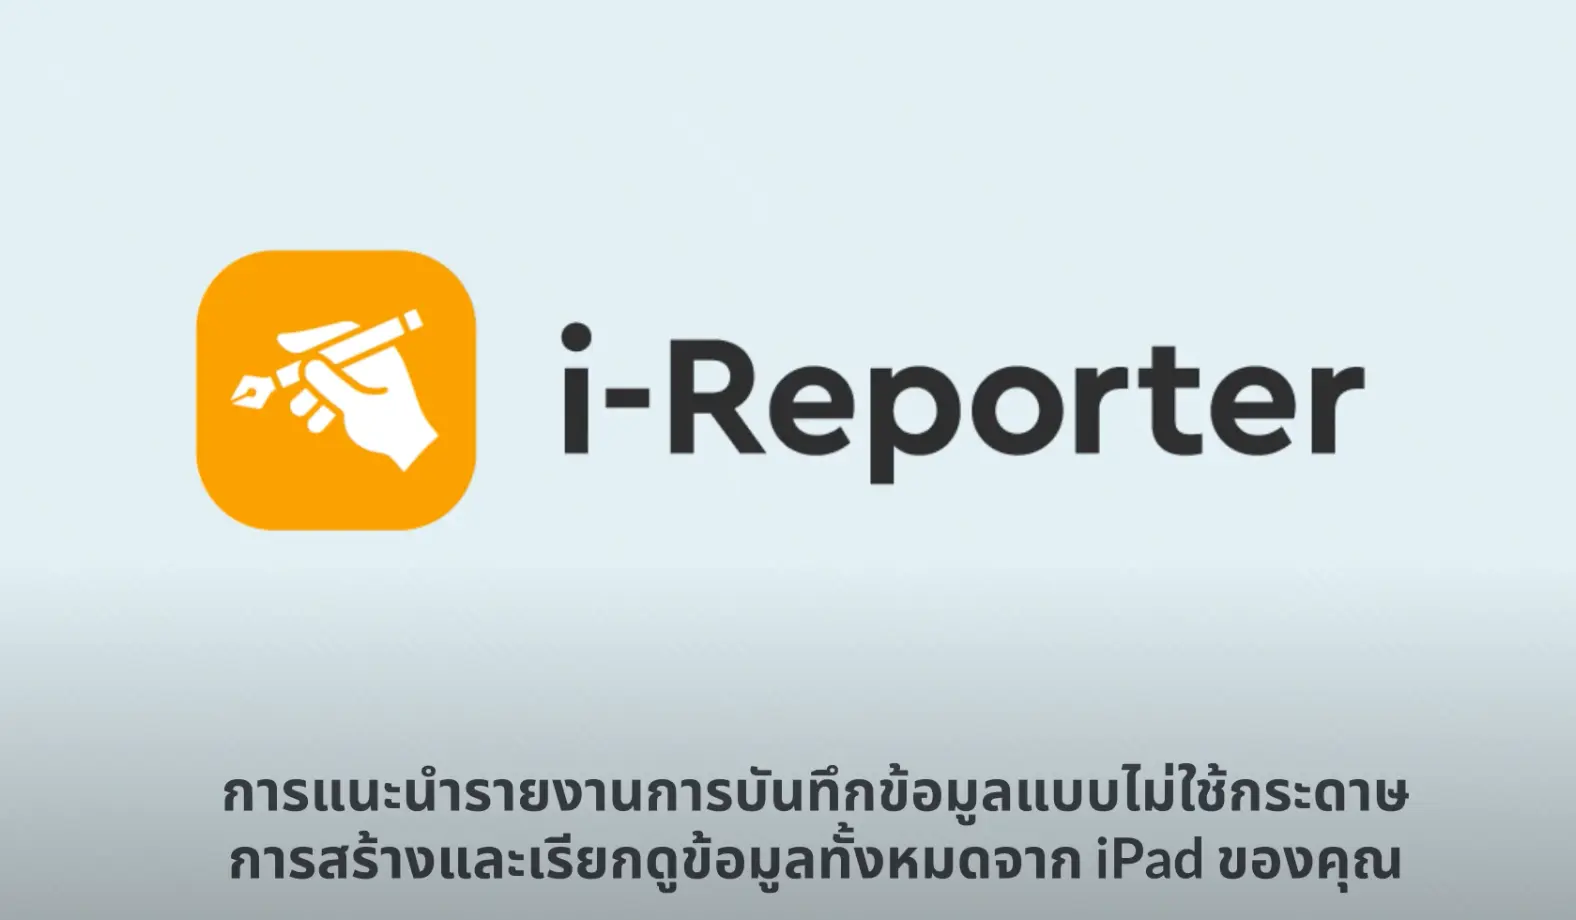 Uploaded new i-Reporter introduction video (Thai language) on YouTube